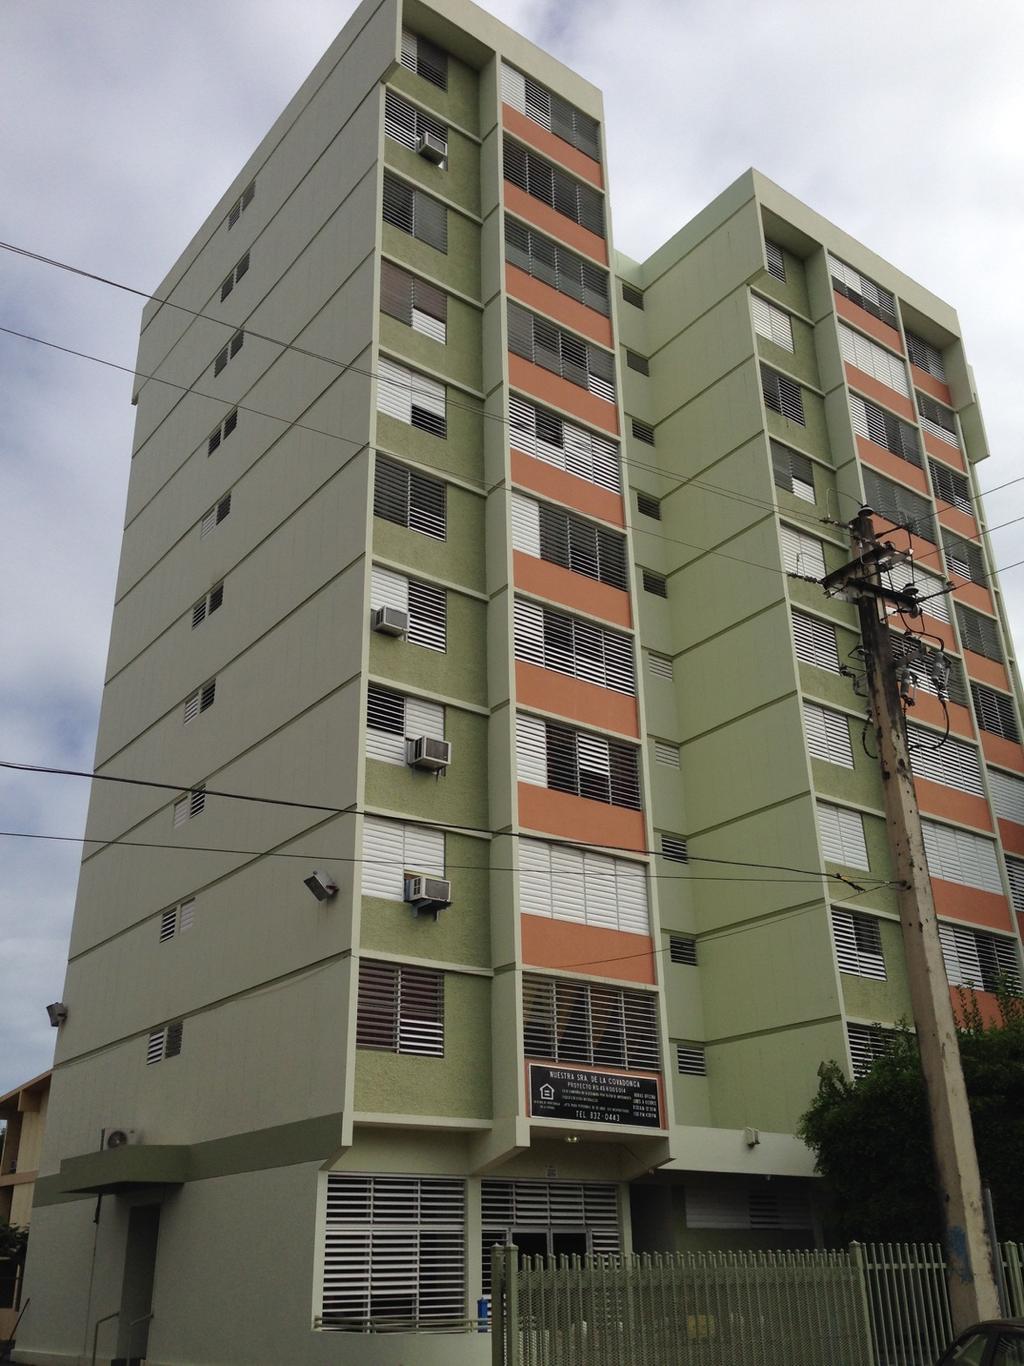 NUESTRA SEÑORA DE LA COVADONGA Las Flores #45 Final Mayaguez PR 00680 Complex with 60 one-bedroom apartments. Located near pharmacies. It has a laundry room and a community center with a kitchen.